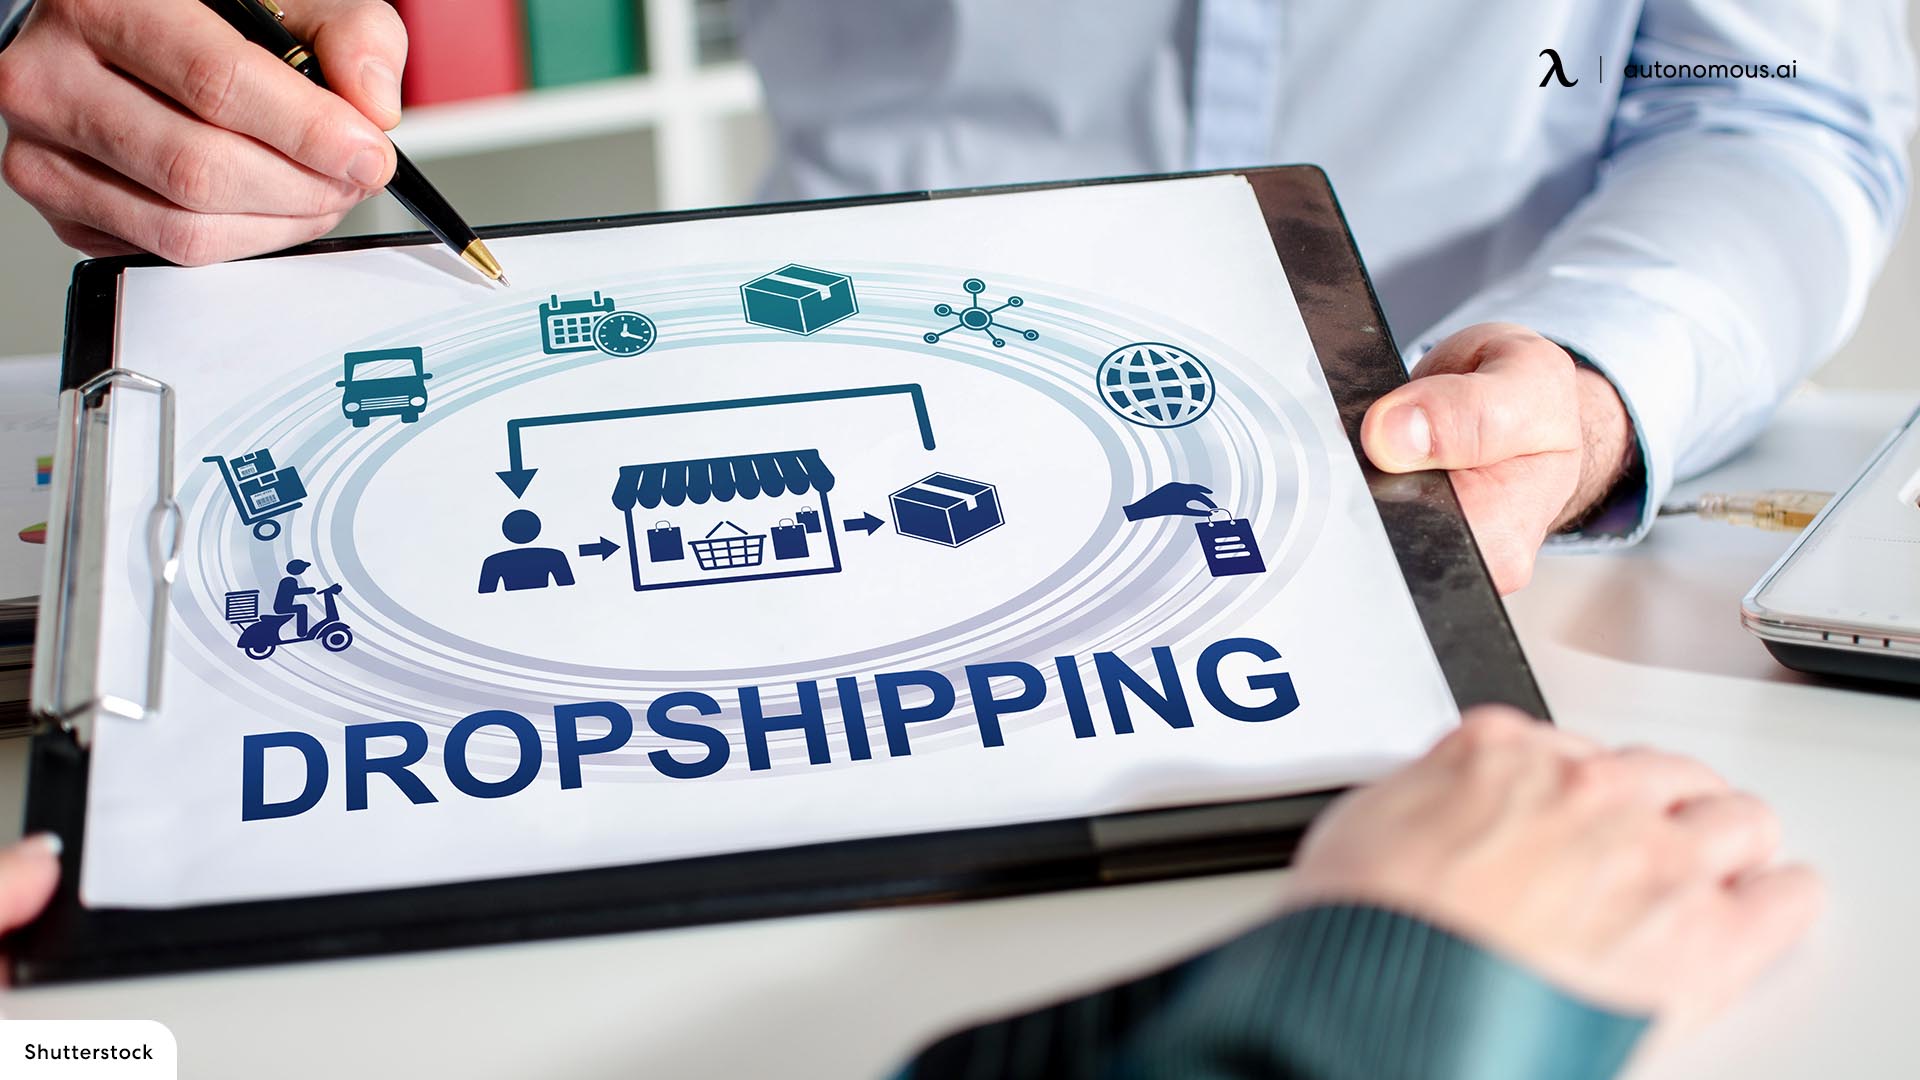 Begin a Drop Shipping Store with Home business ideas